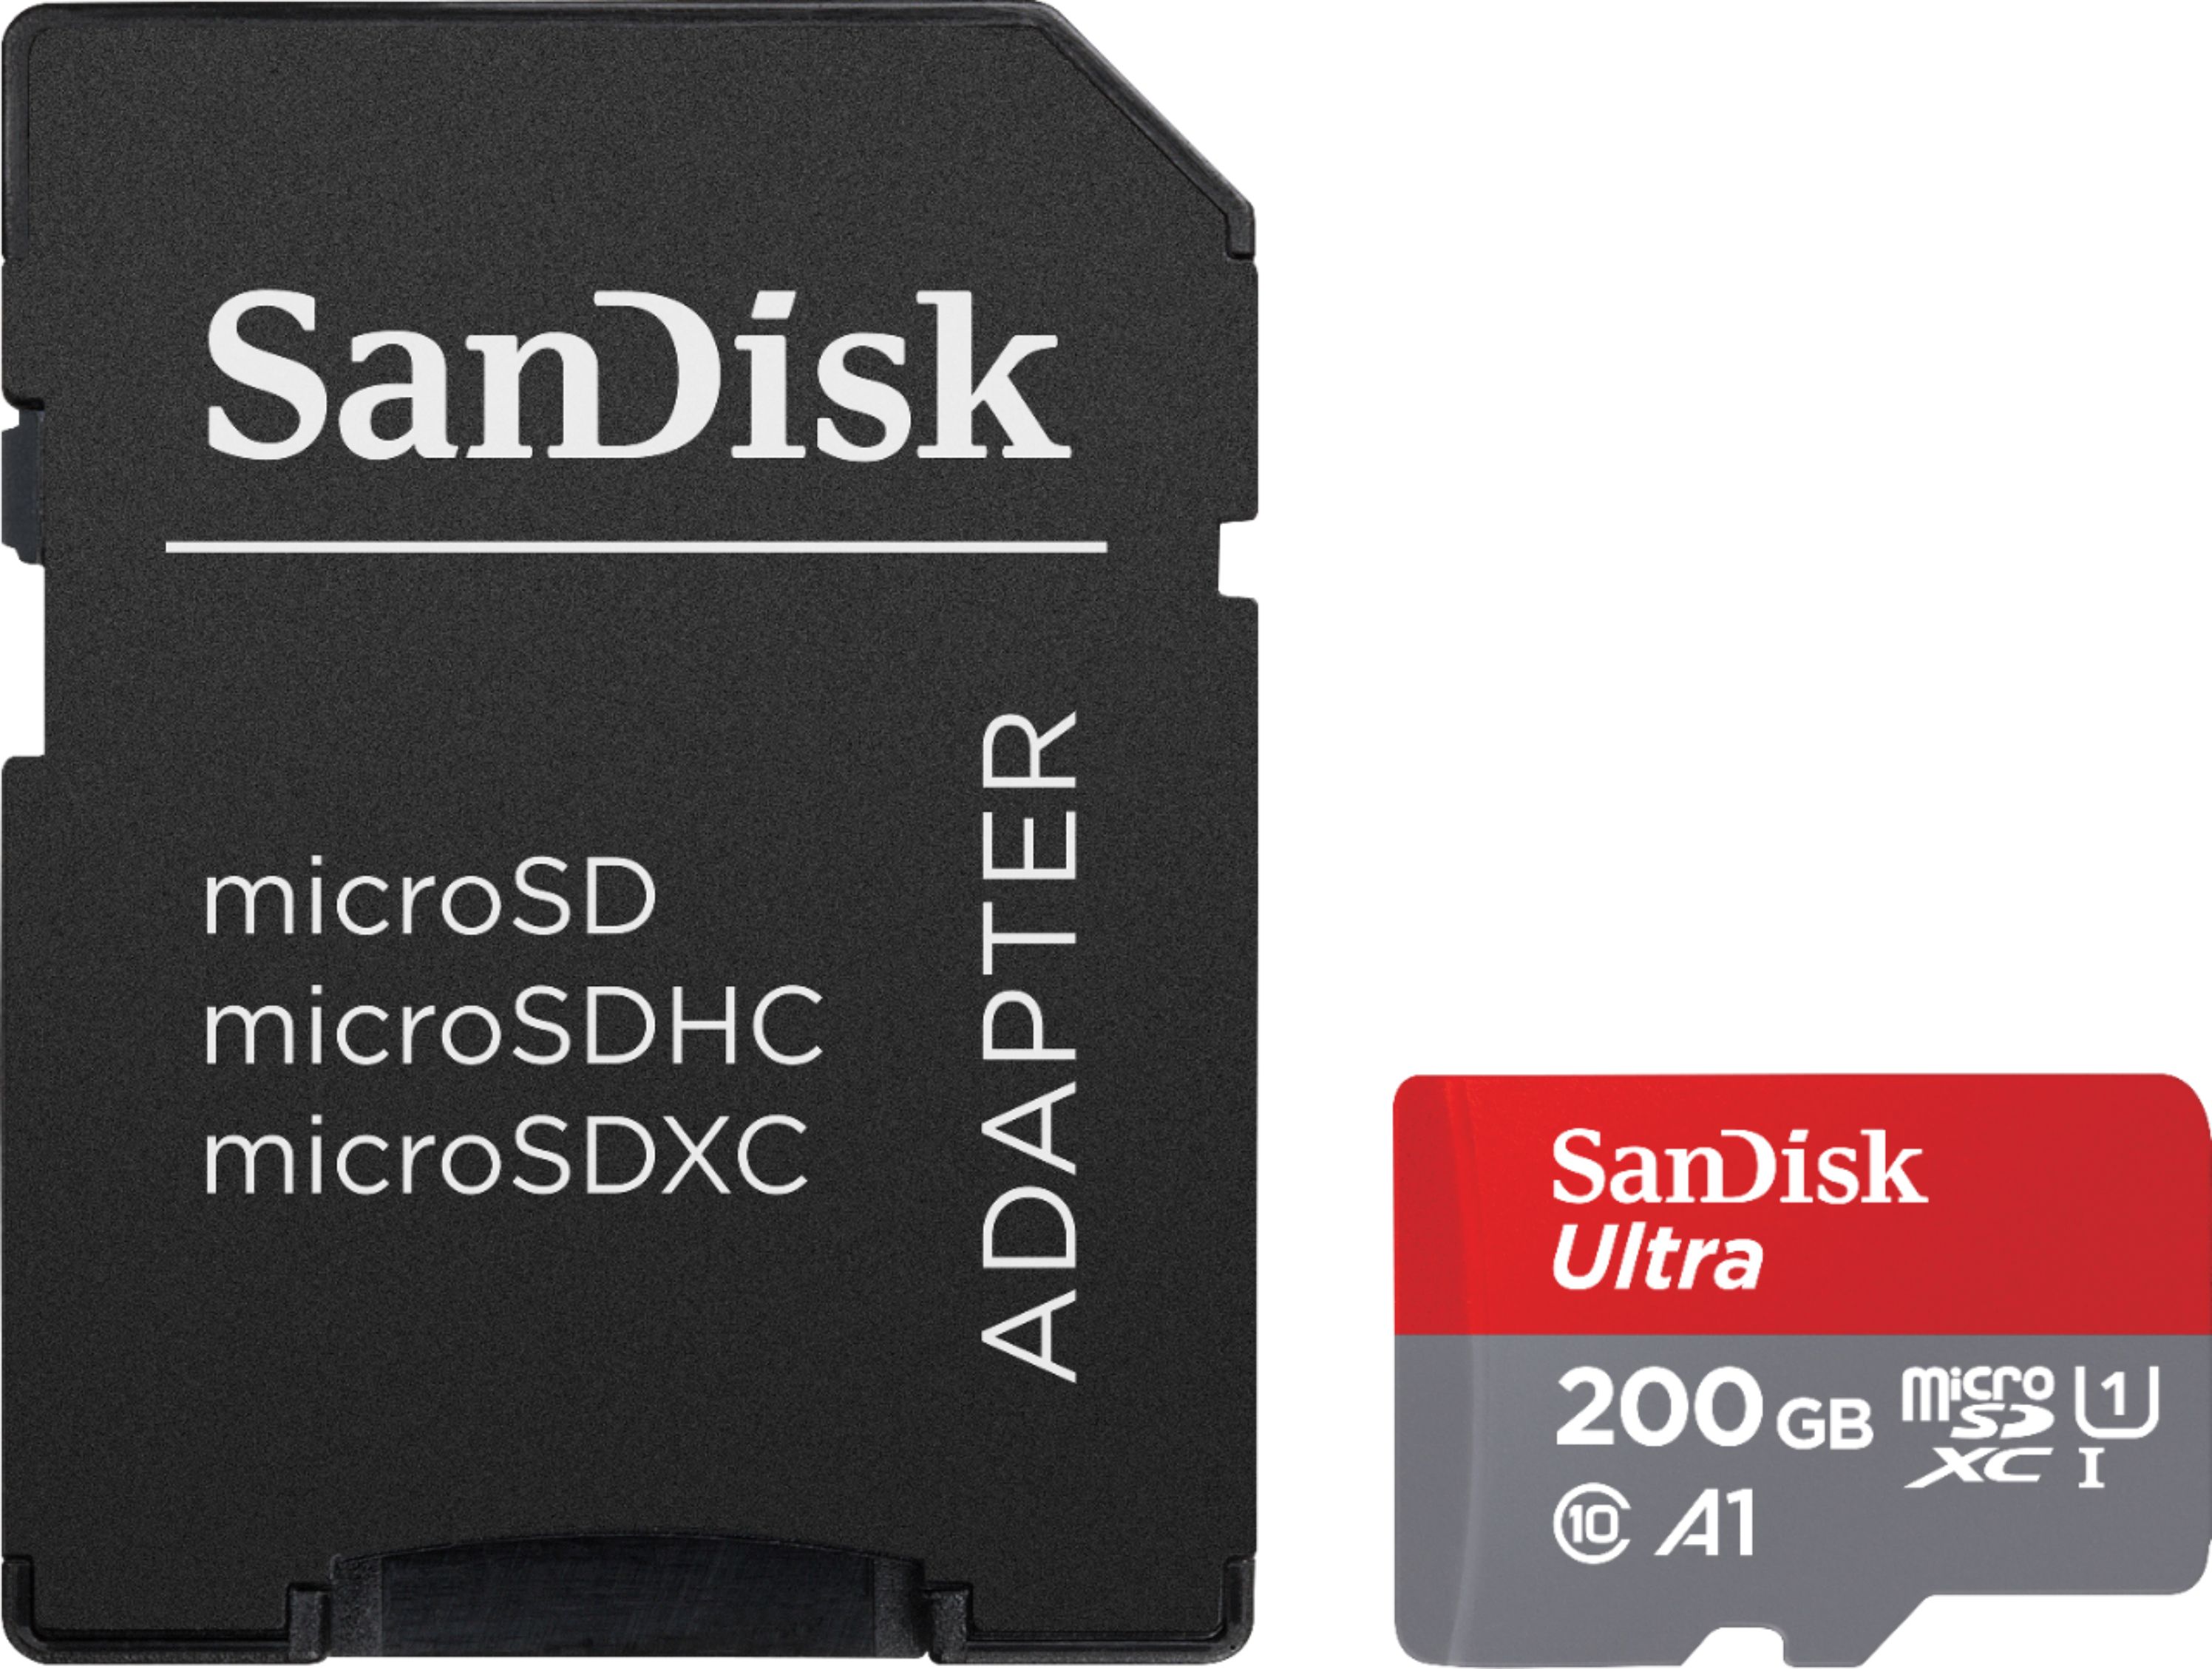 SanDisk Ultra 200GB MicroSDXC Verified for Karbonn A19 by SanFlash 100MBs A1 U1 C10 Works with SanDisk